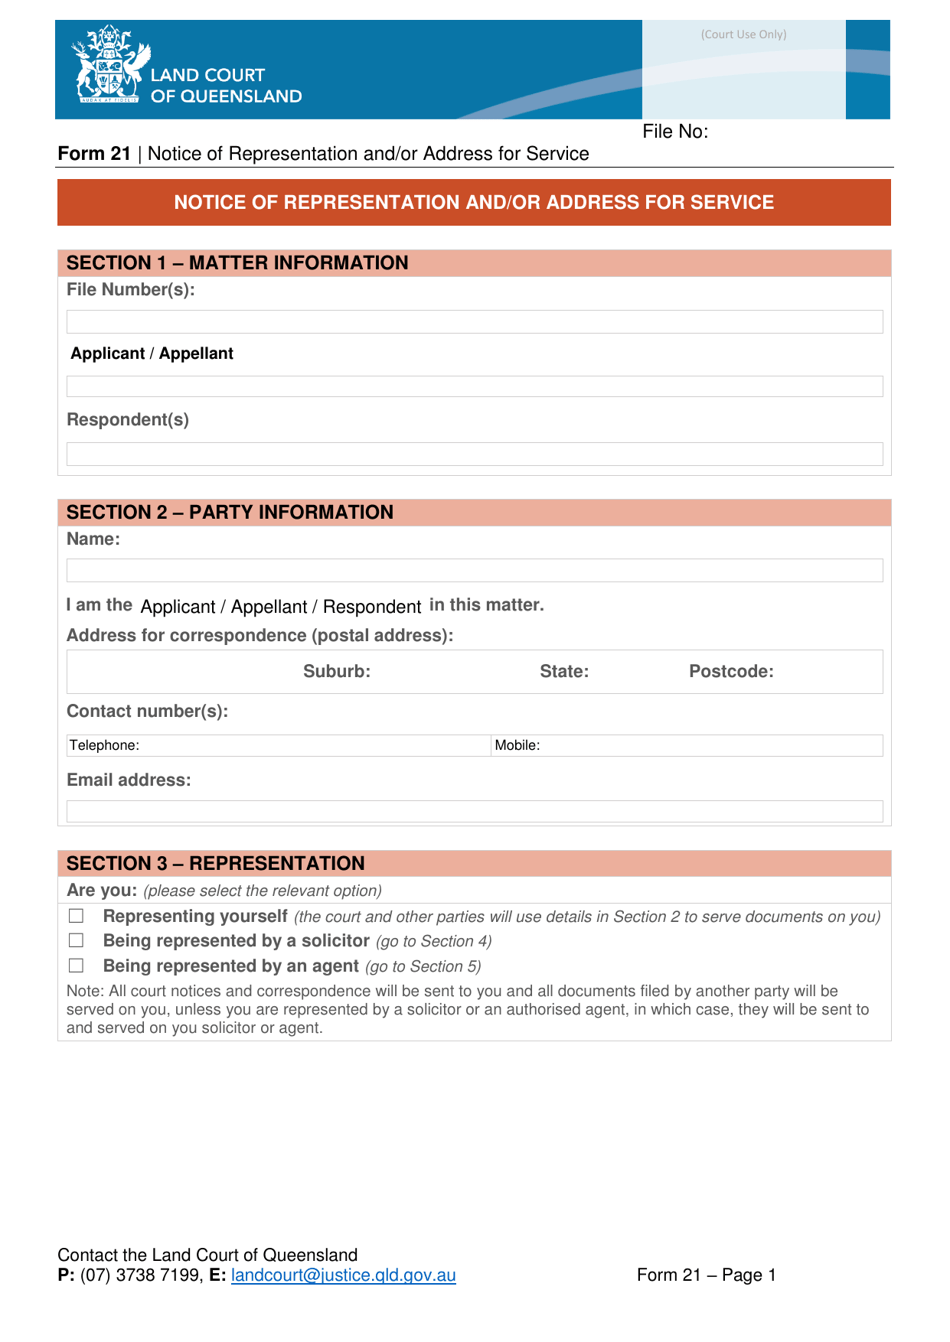 Form 21 Notice of Representation and / or Address for Service - Queensland, Australia, Page 1